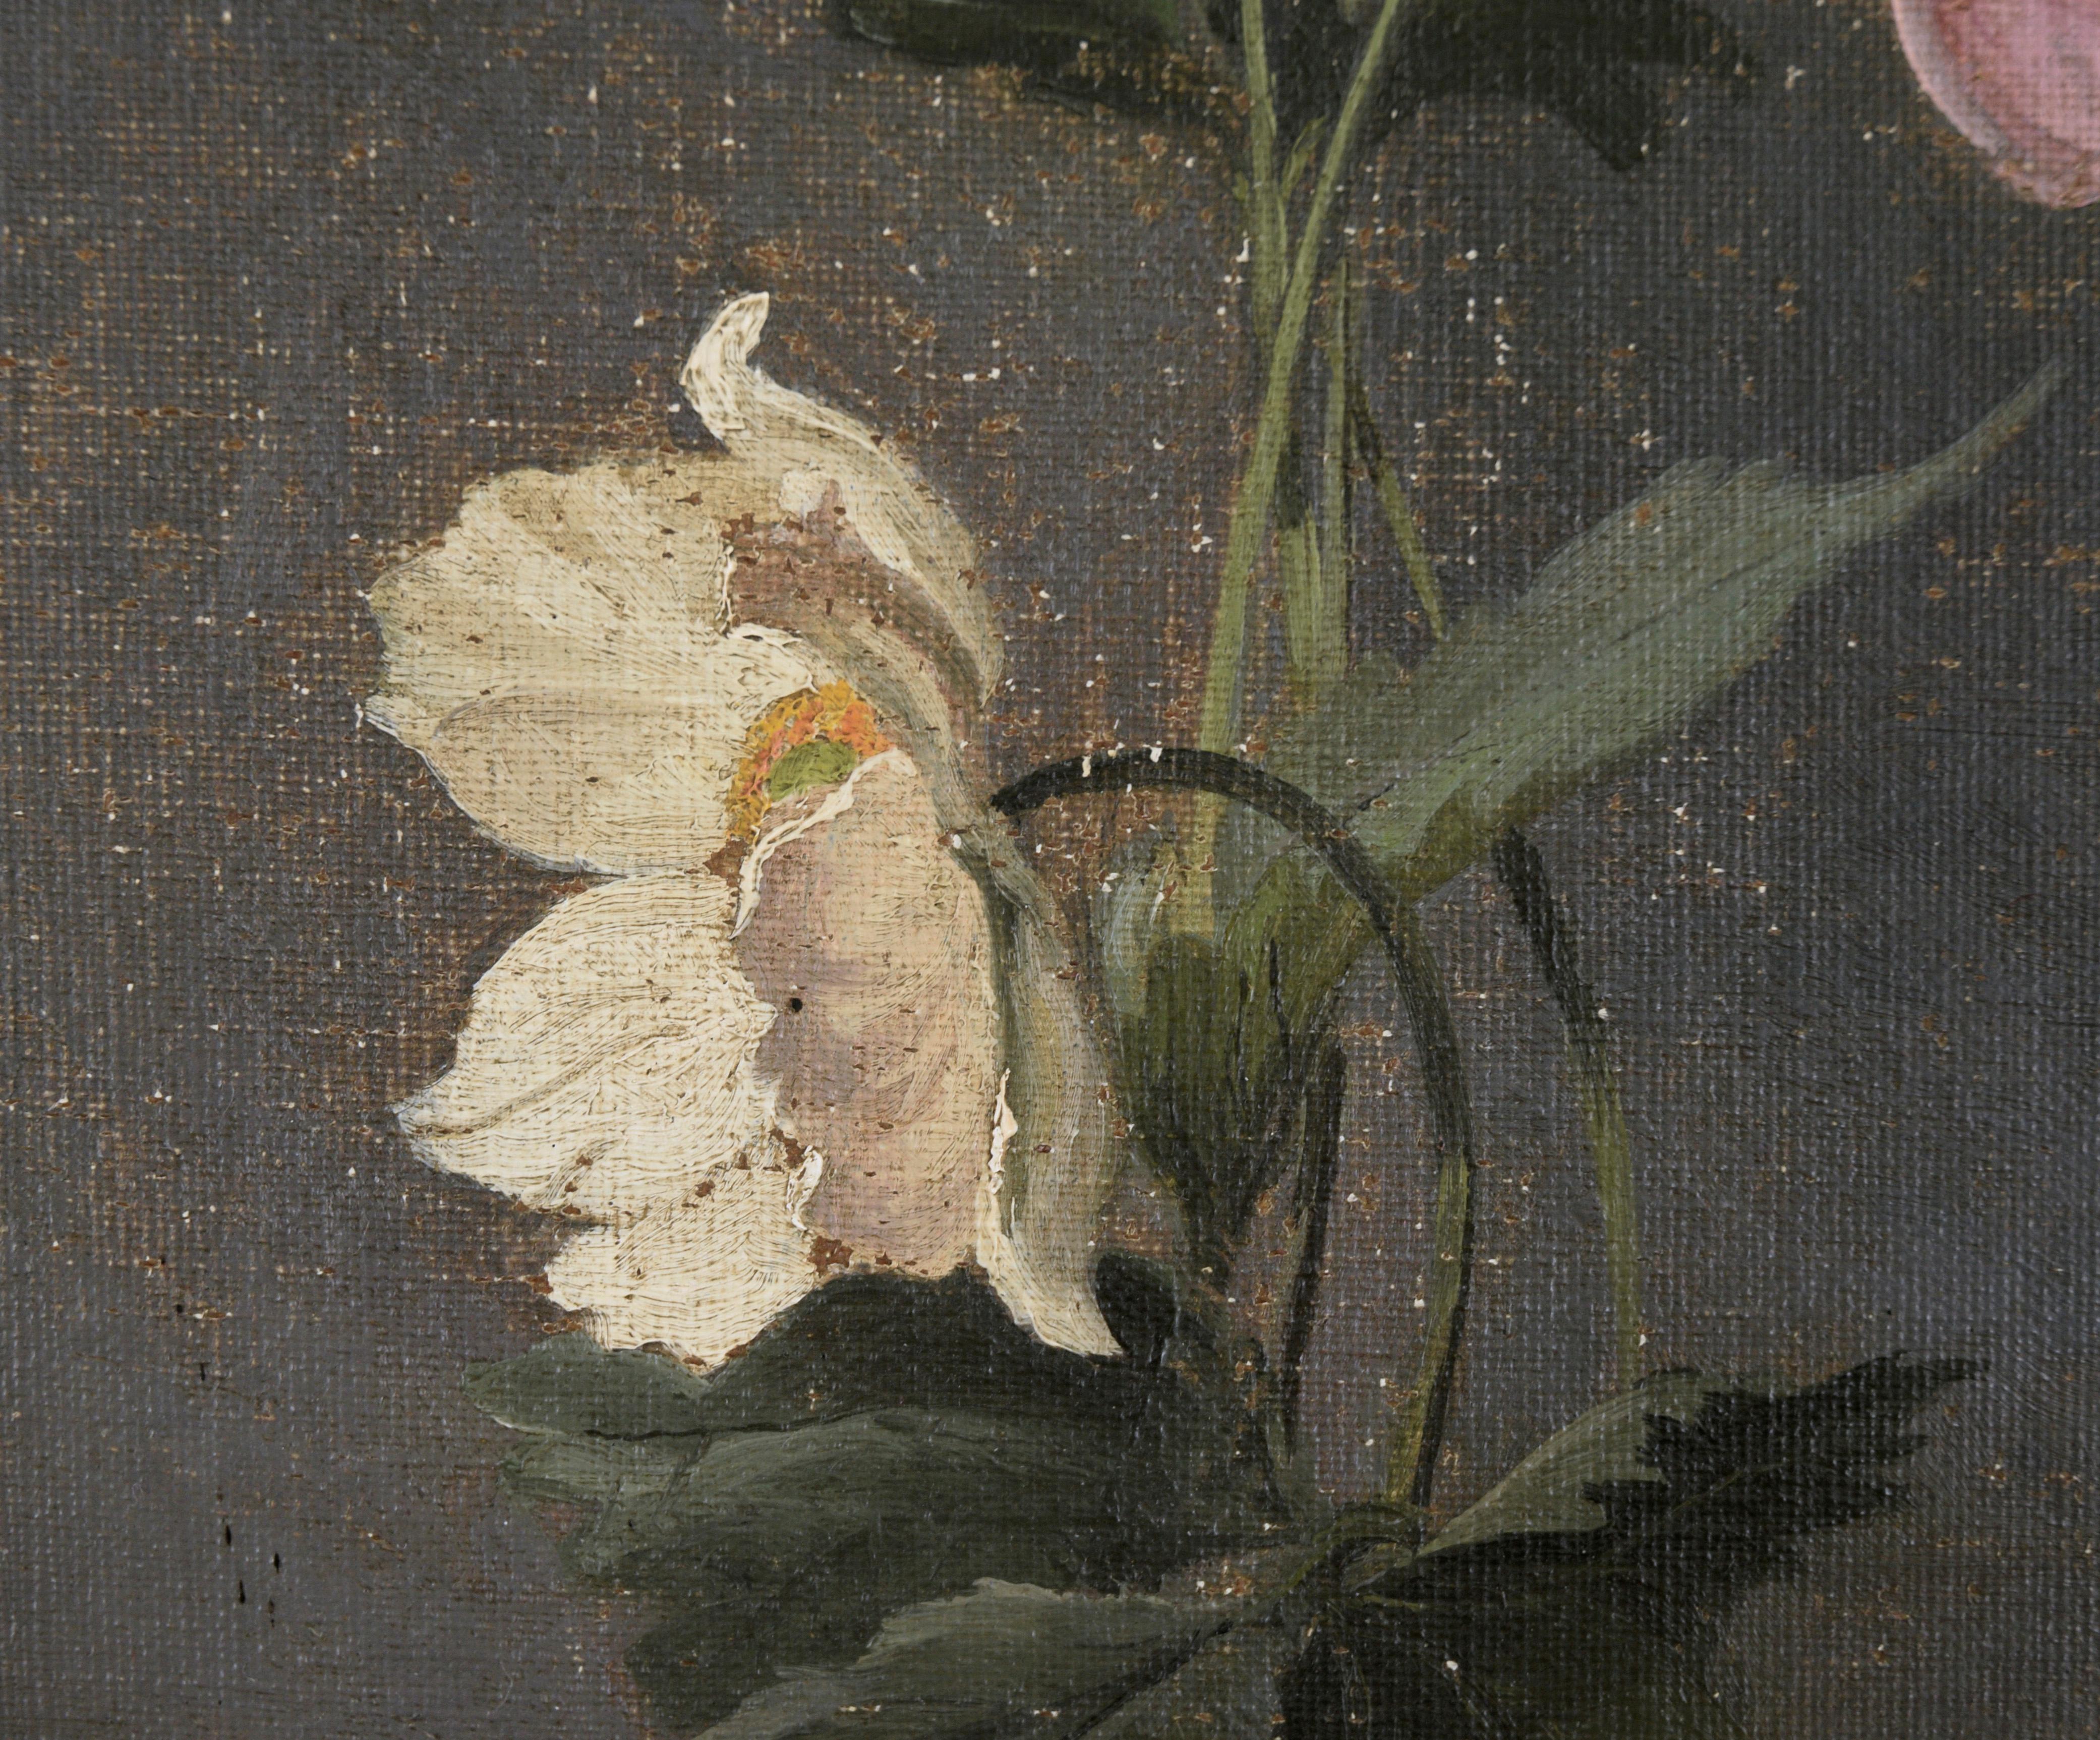 Poppy and Anemone Still Life Floral Study in Oil on Linen - Romantic Painting by Karl Harald Alfred Broge